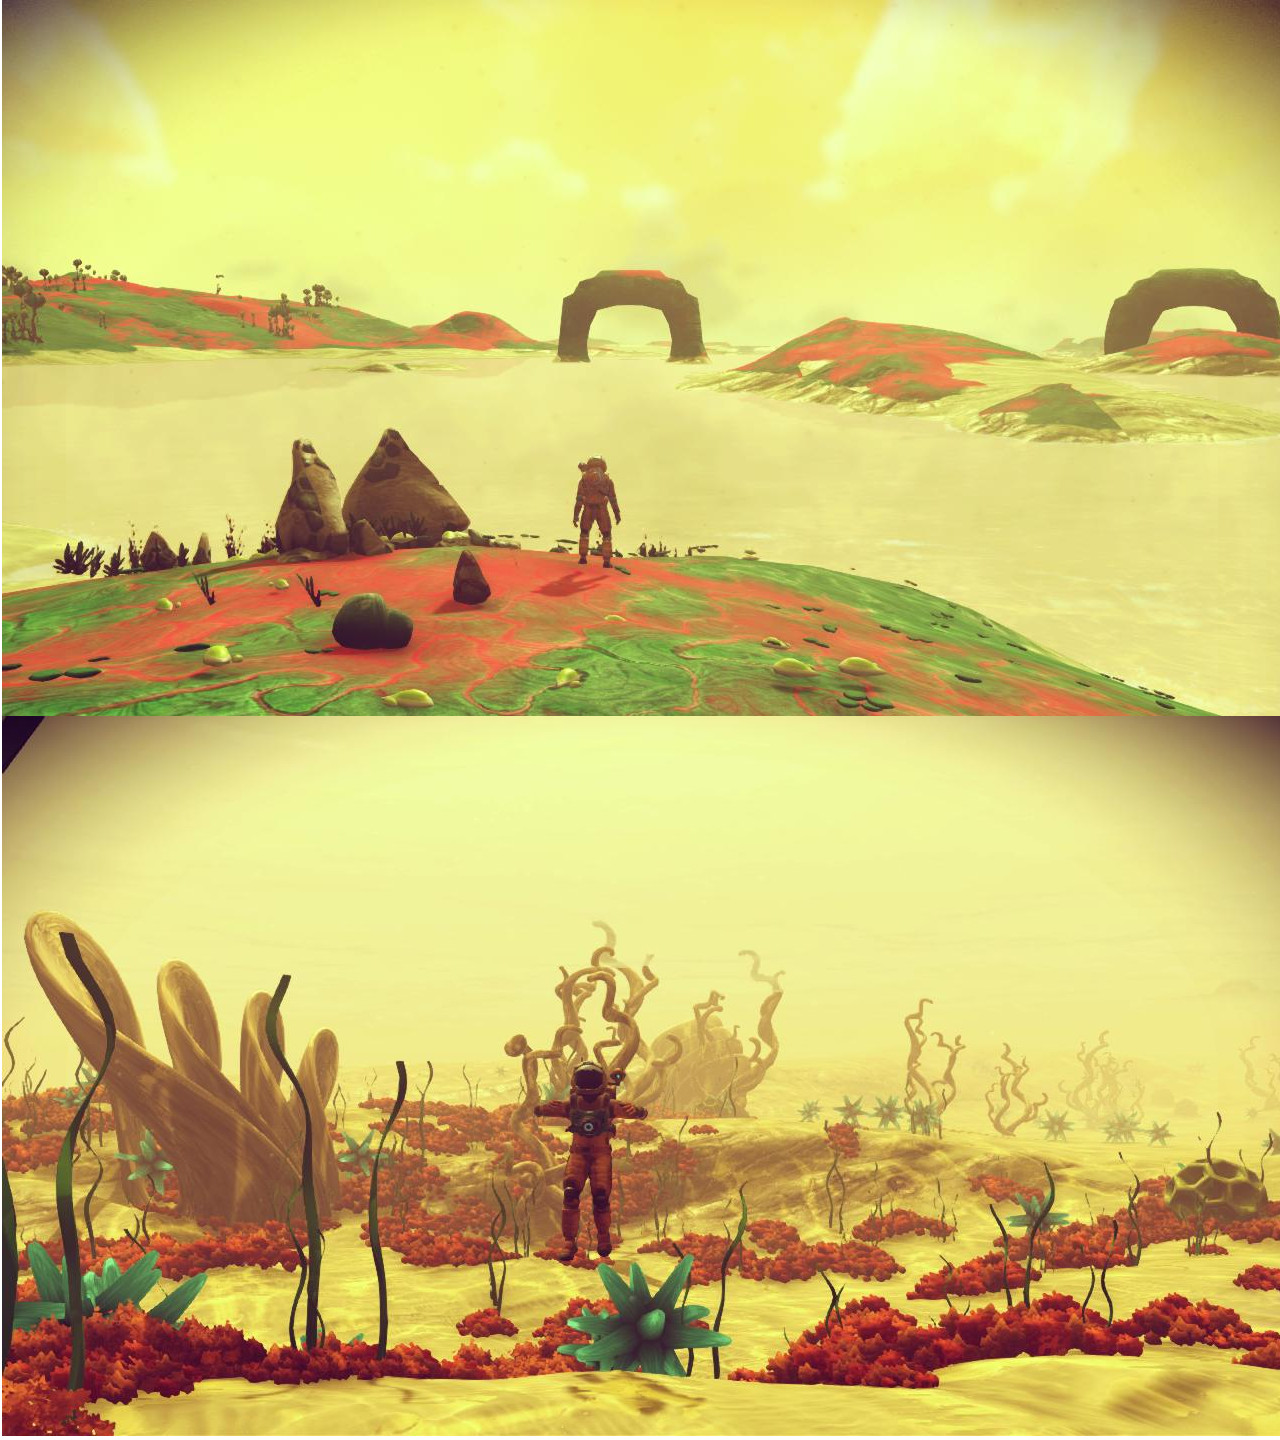 Project Atlas Water colors Overhaul by gamer ( for visions)